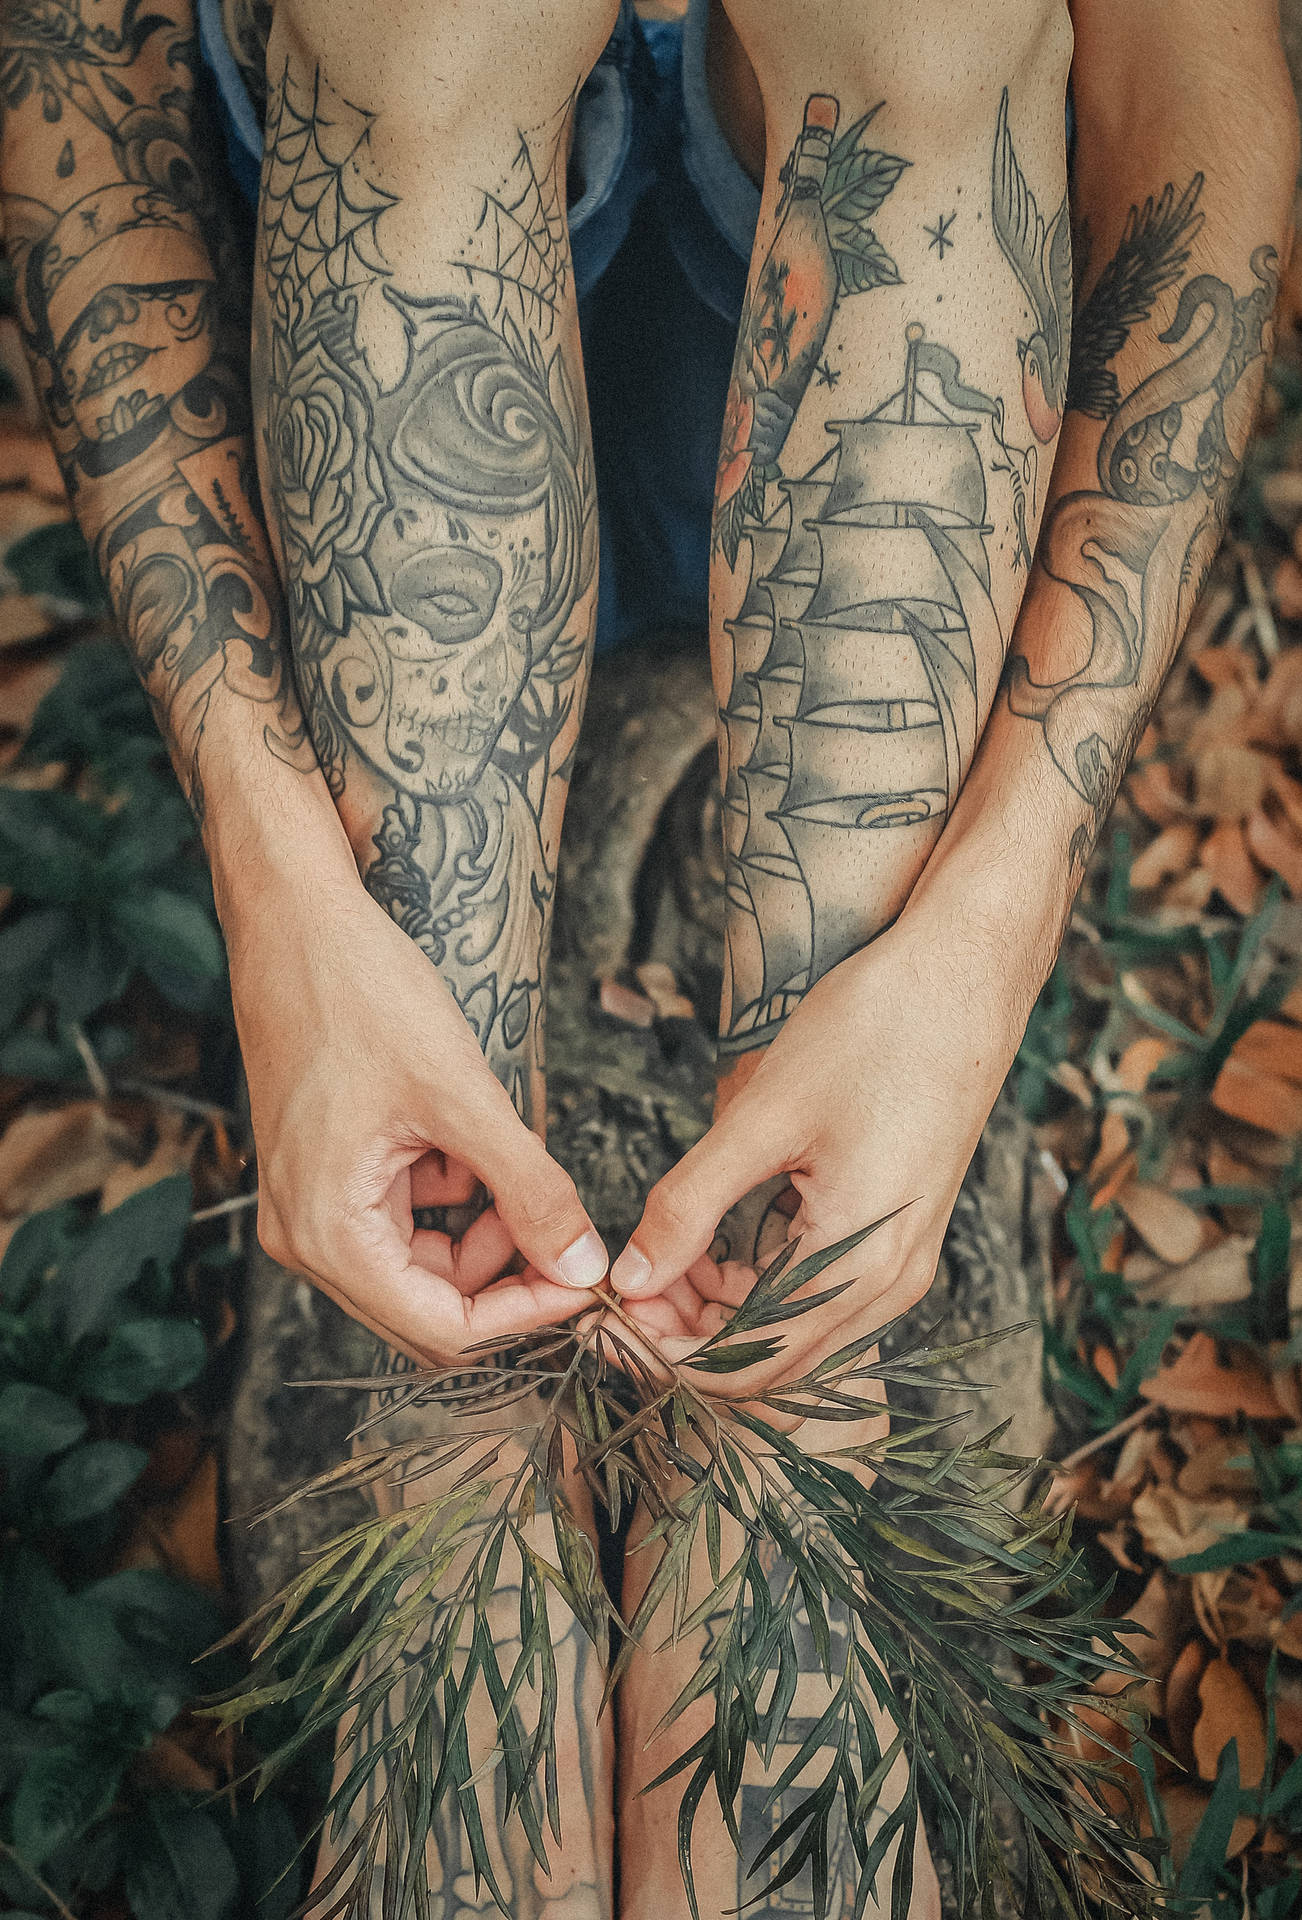 Hd Tattoo Arms And Legs Wallpaper